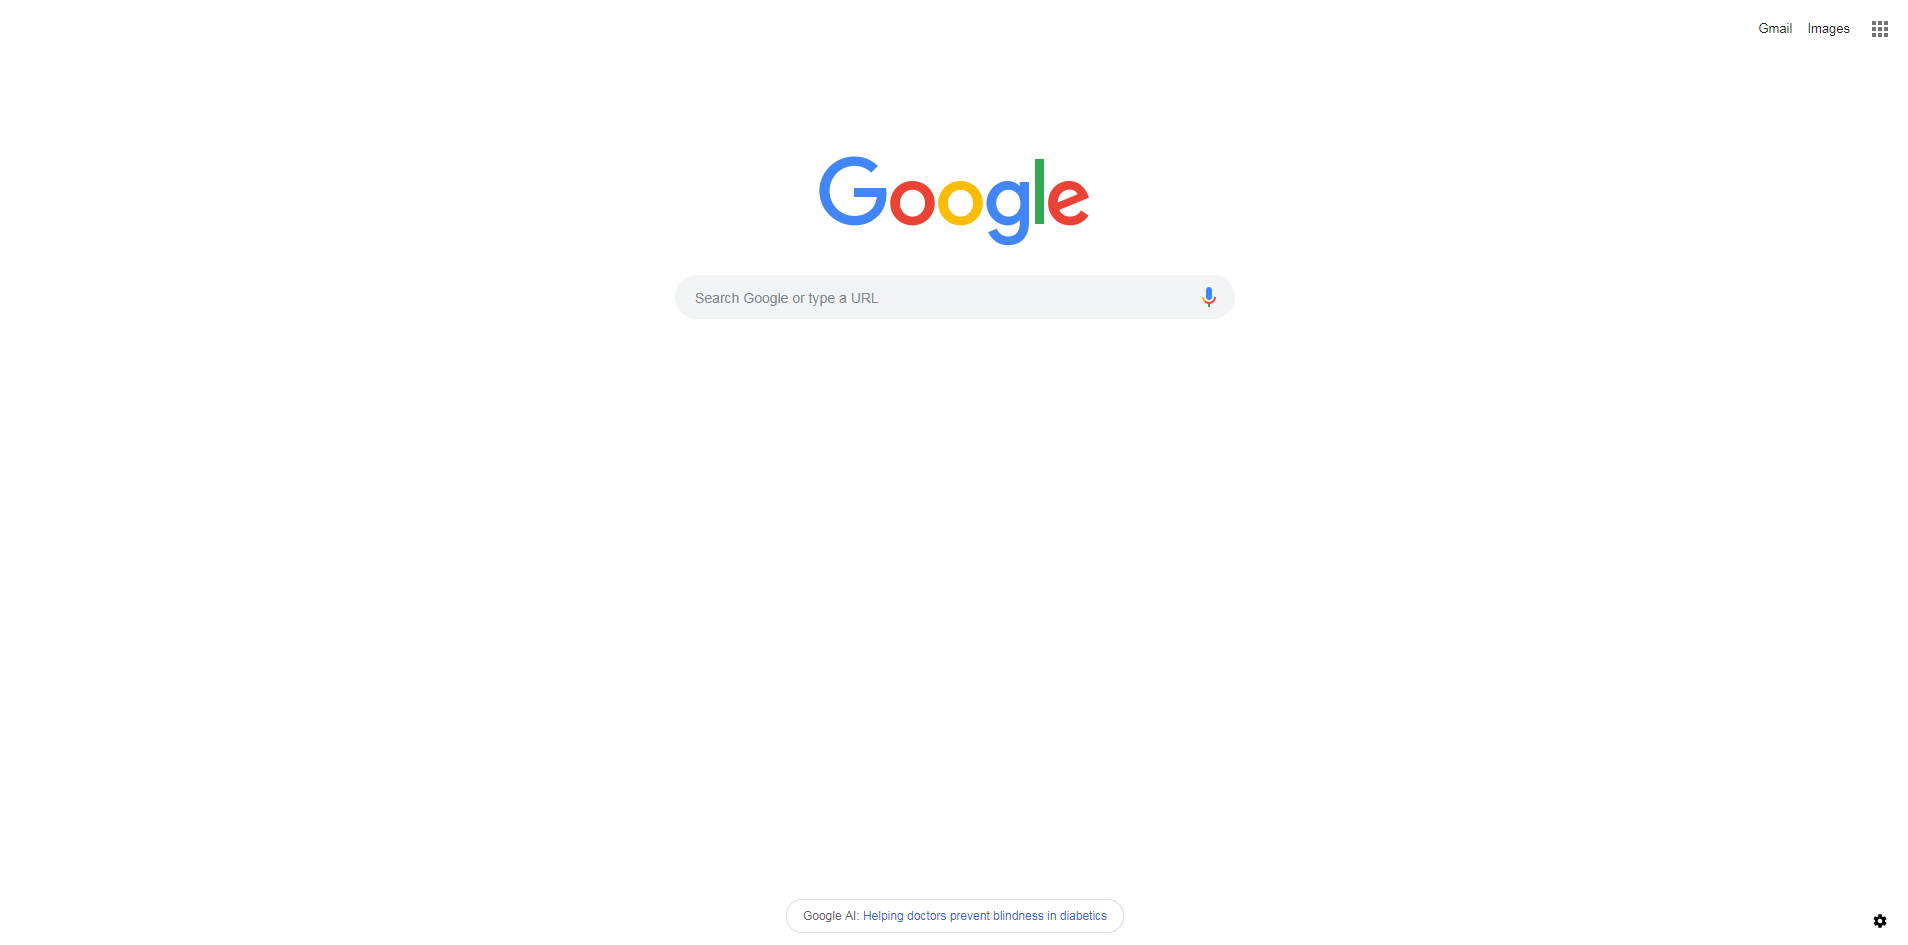 Google's home page.